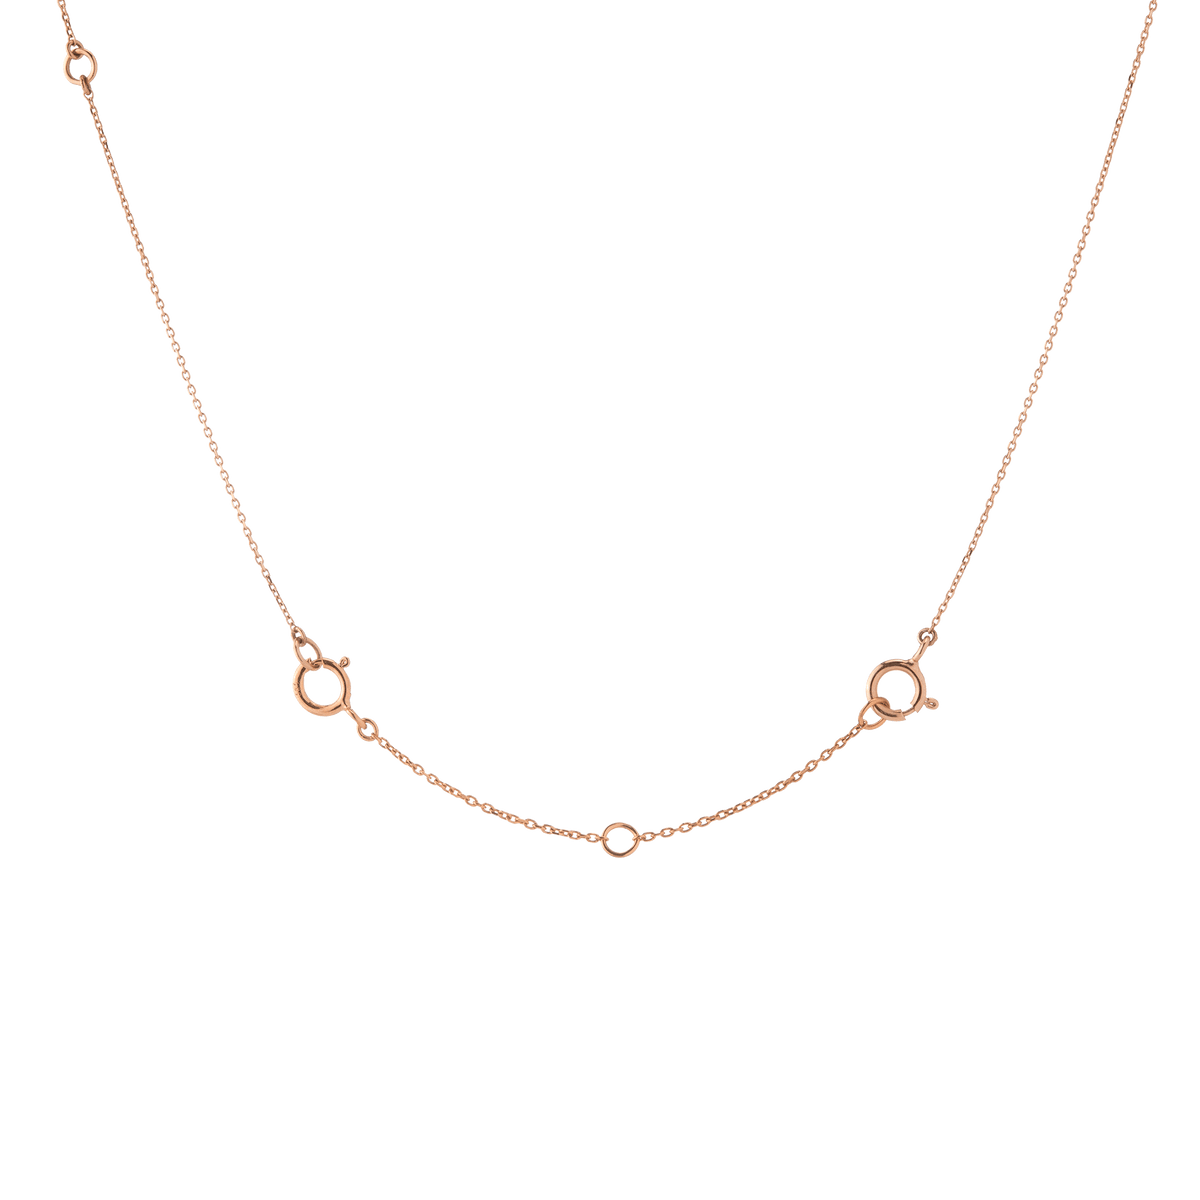 2in 14K Gold Diamond-Cut Cable Chain Extender